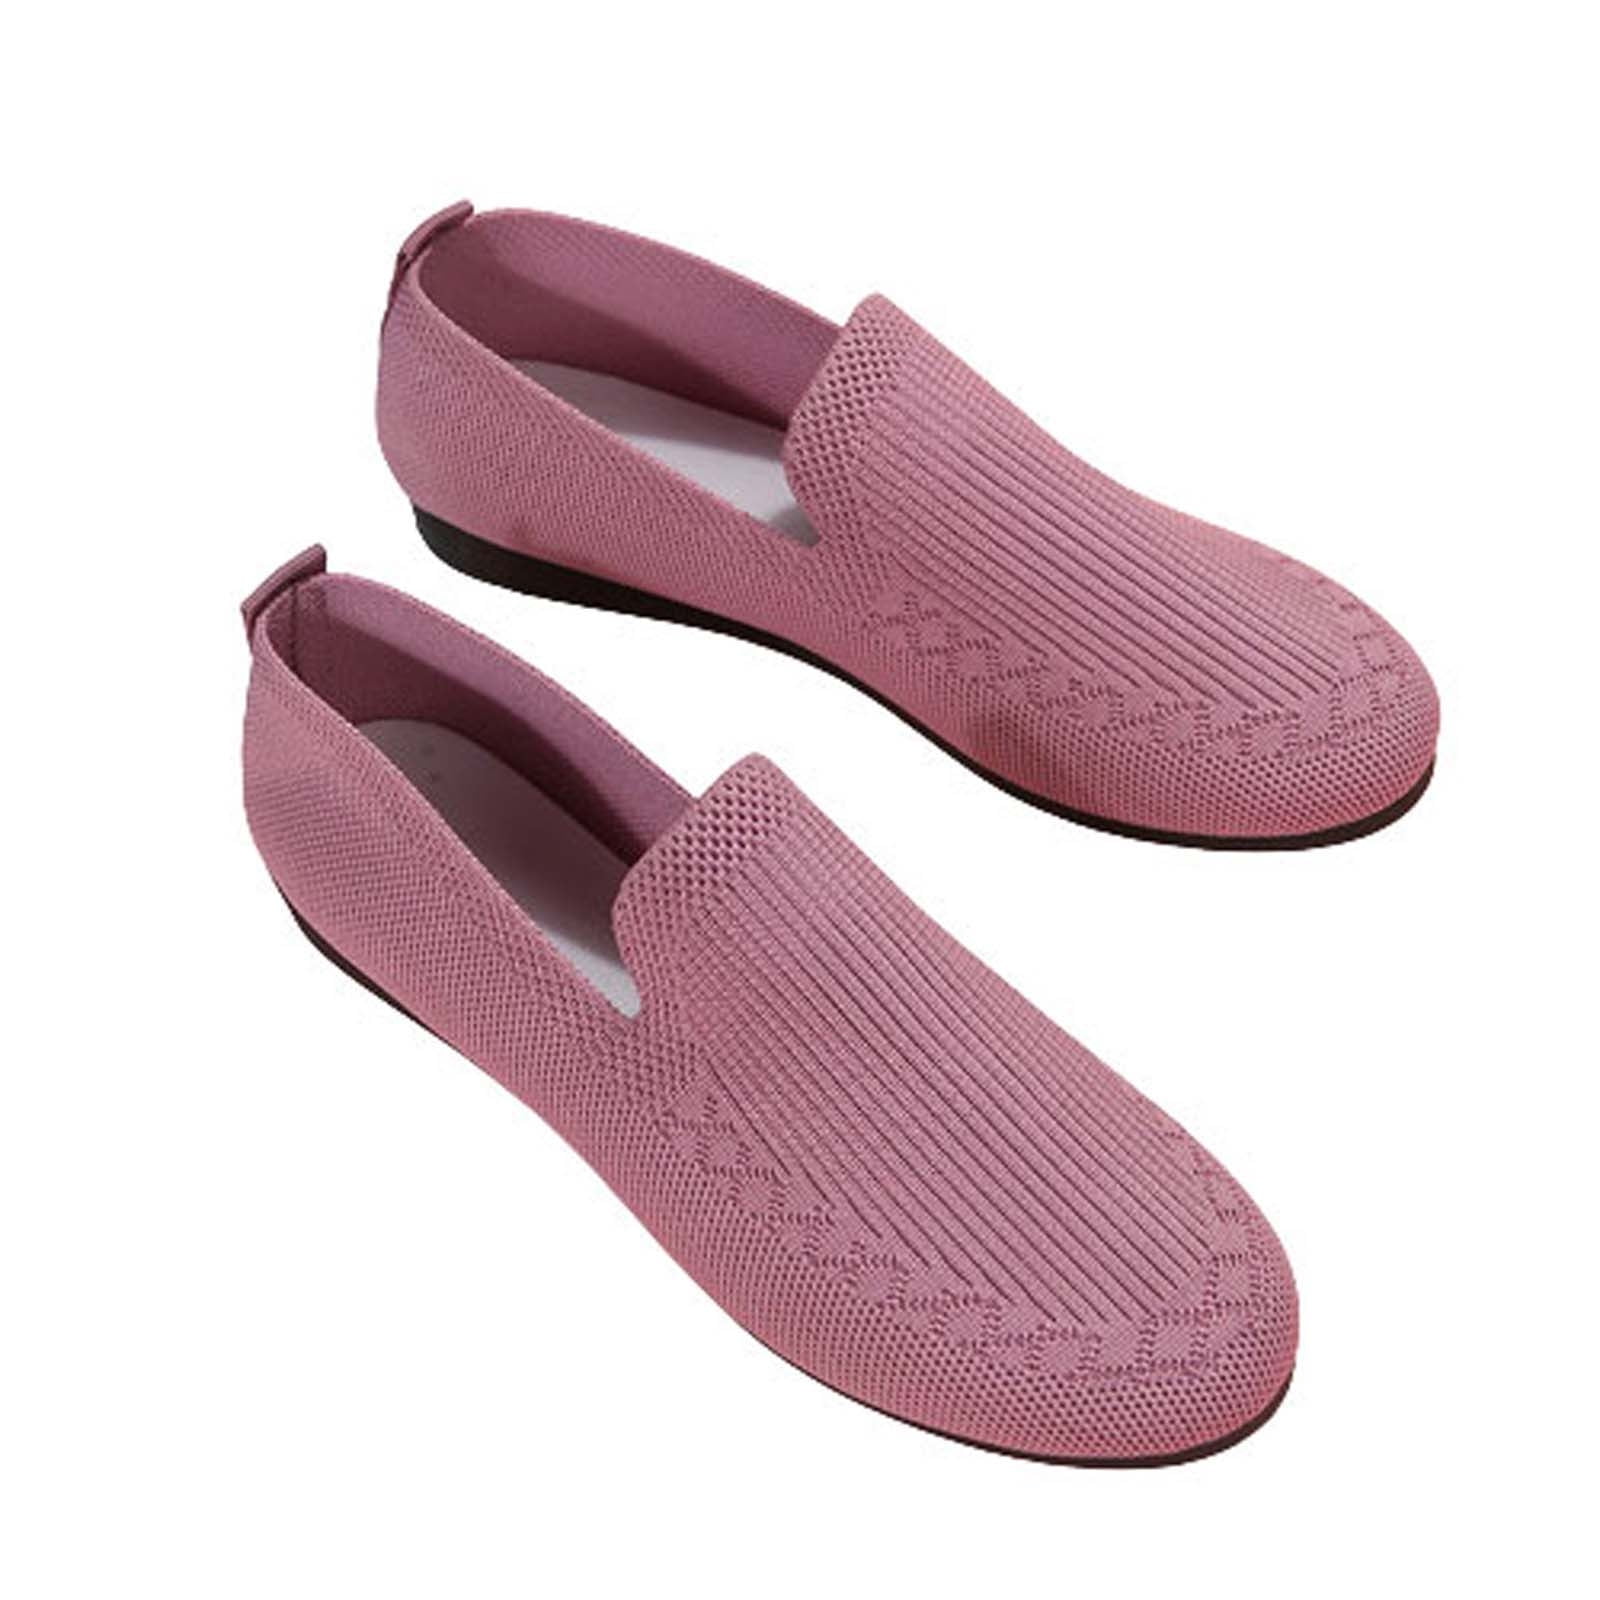 Deals of The Day Clearance Dvkptbk Sneakers for Women, Fashion Women Single  Shoe Round Toe Flat Color Block Loafers Pink 8.5 